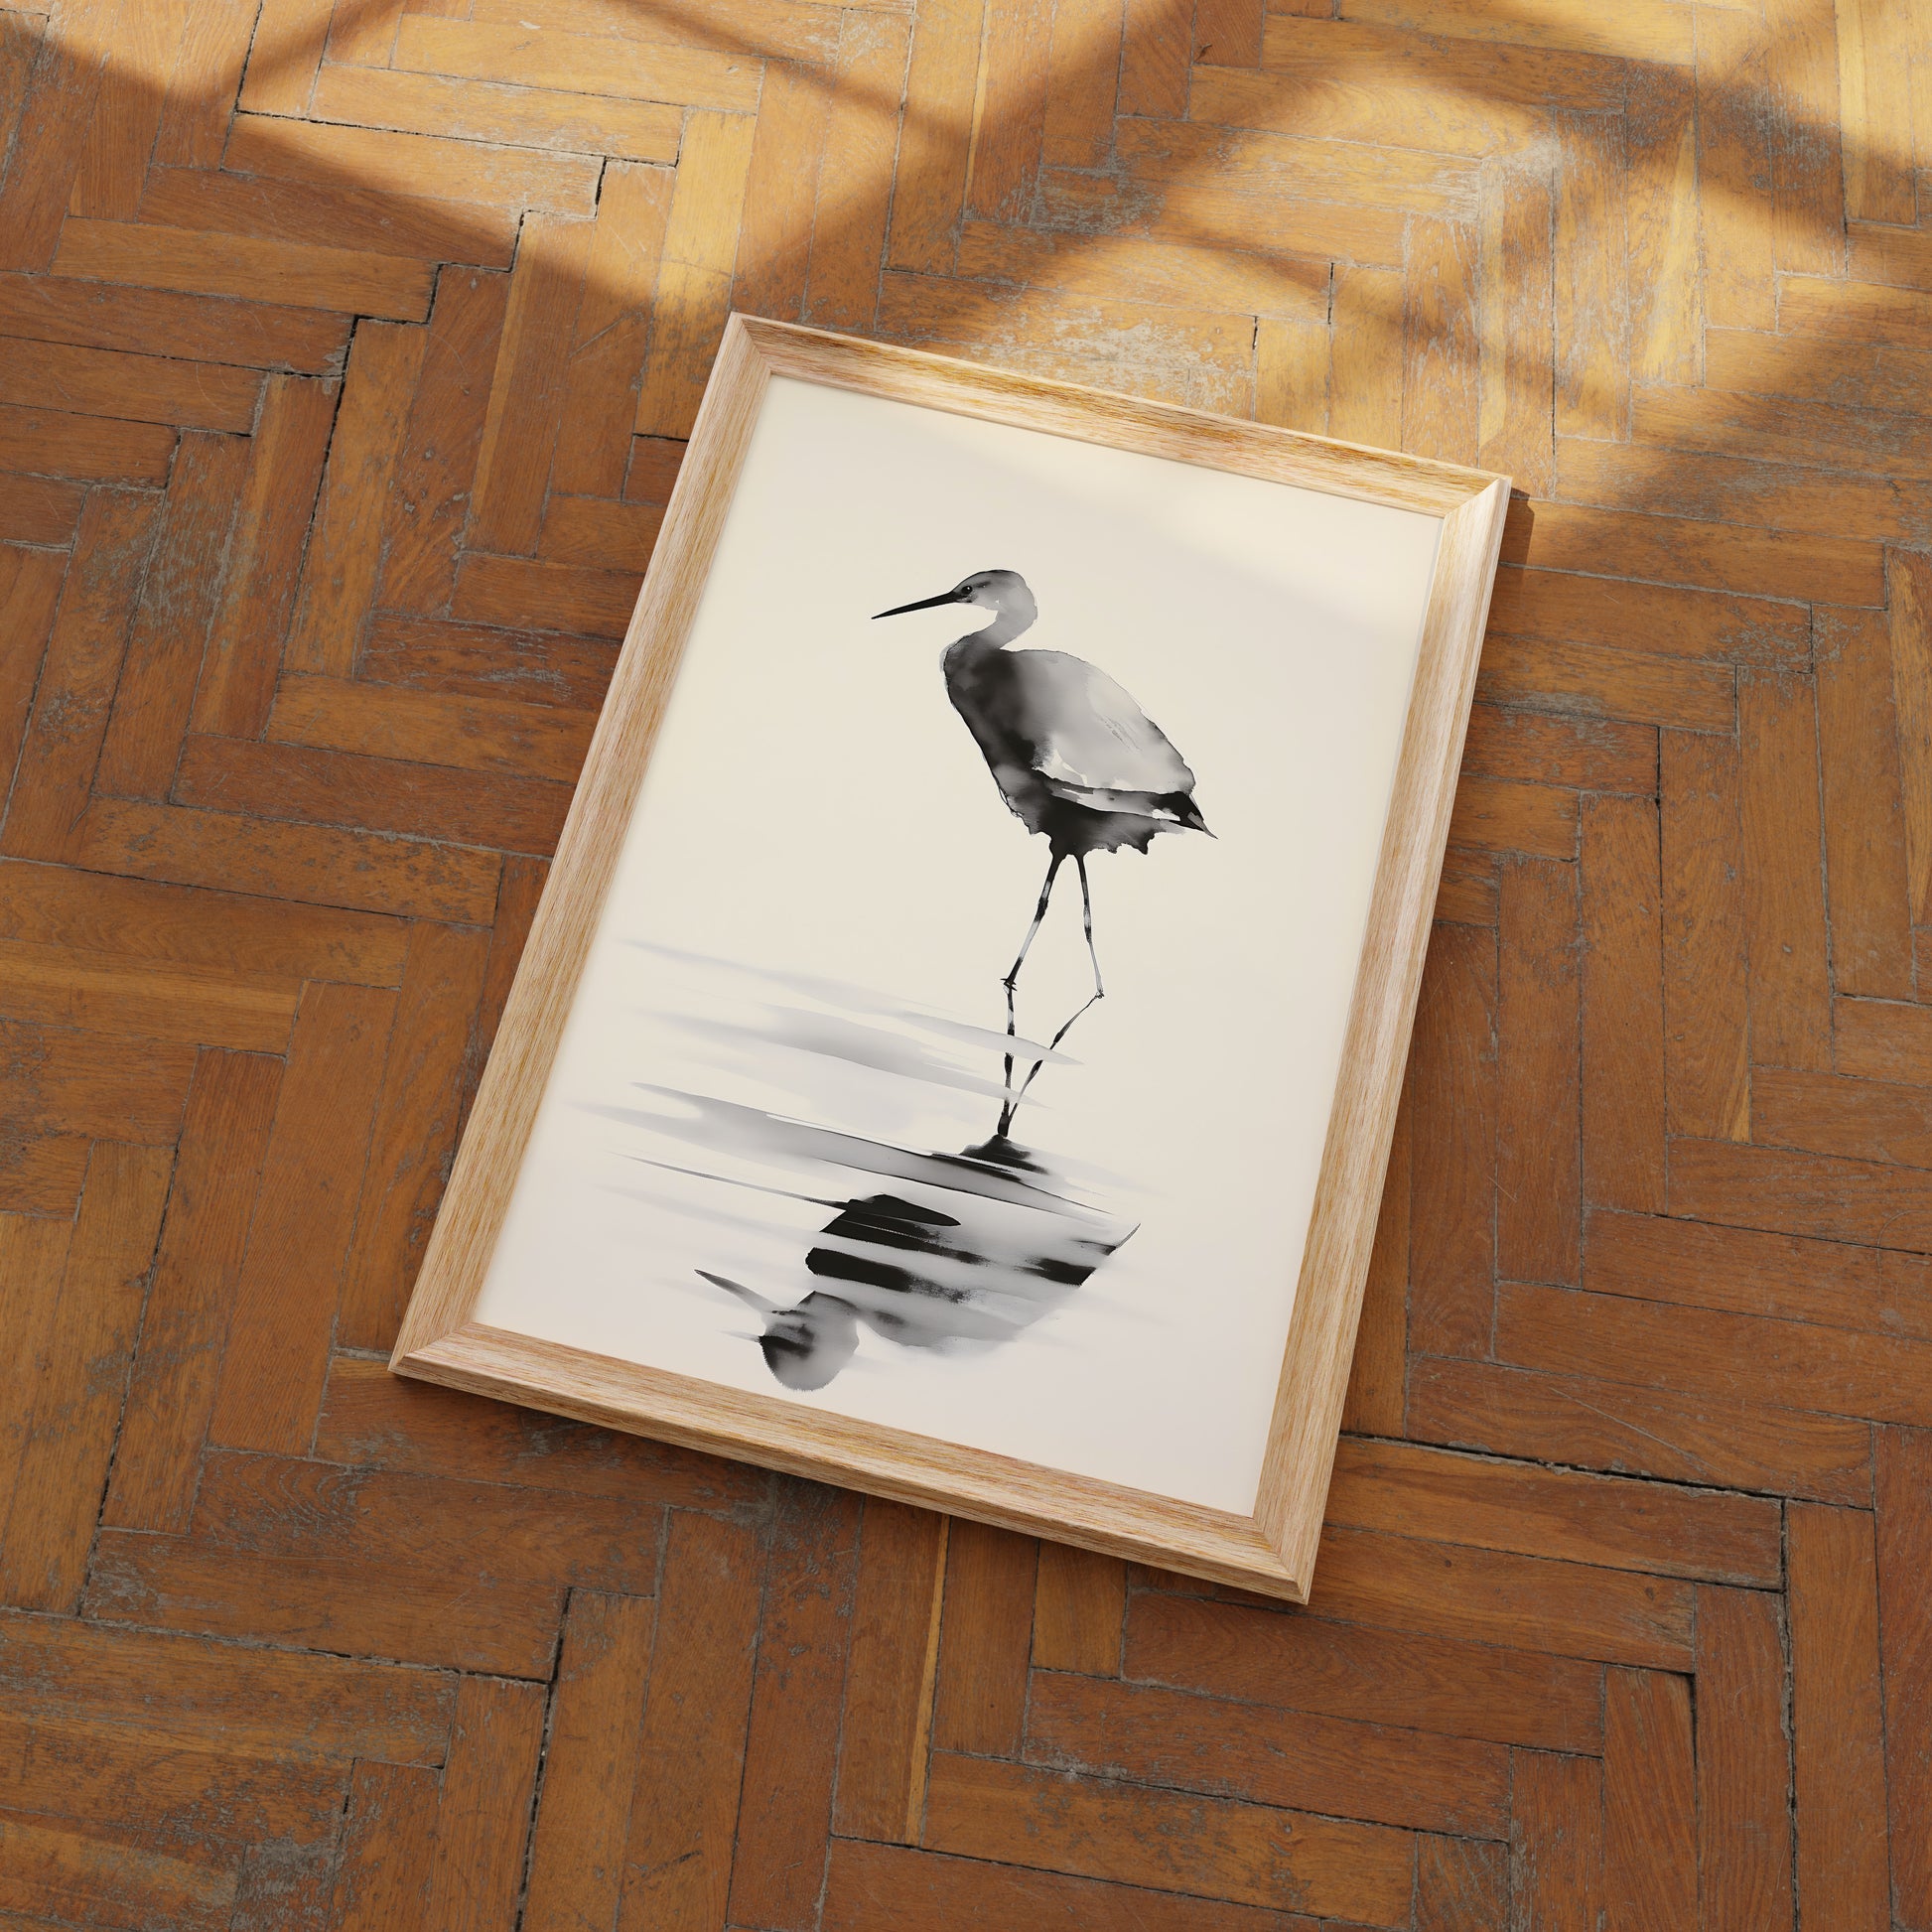 A framed painting of a heron on a wooden floor.